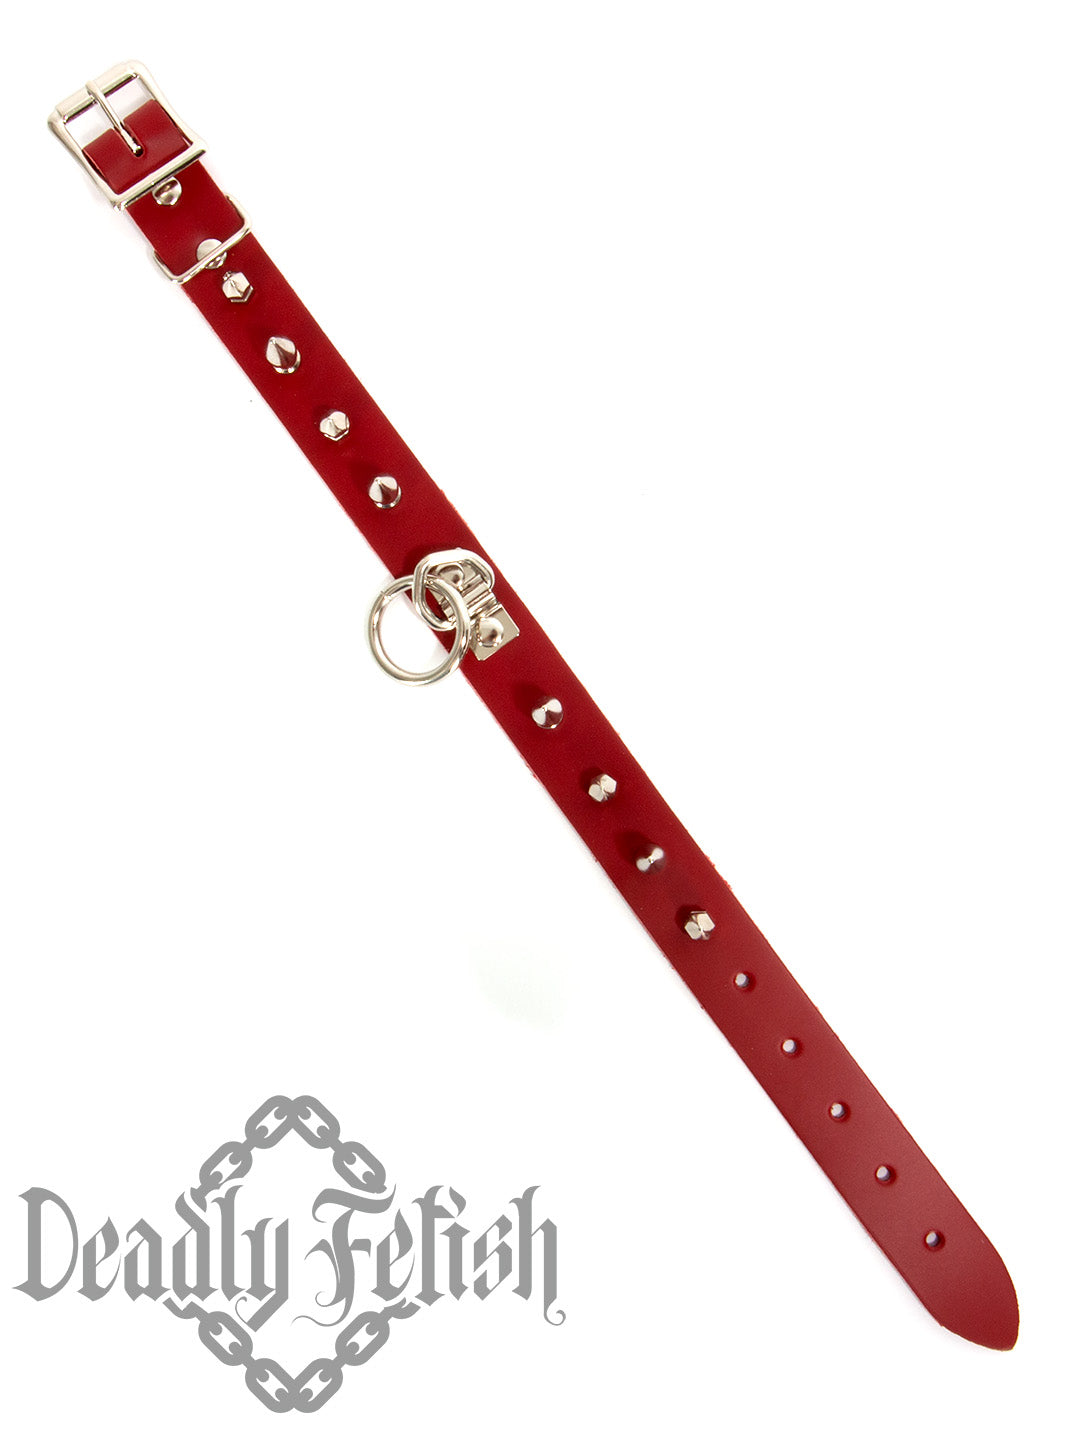 Deadly Fetish Leather: Collar #09